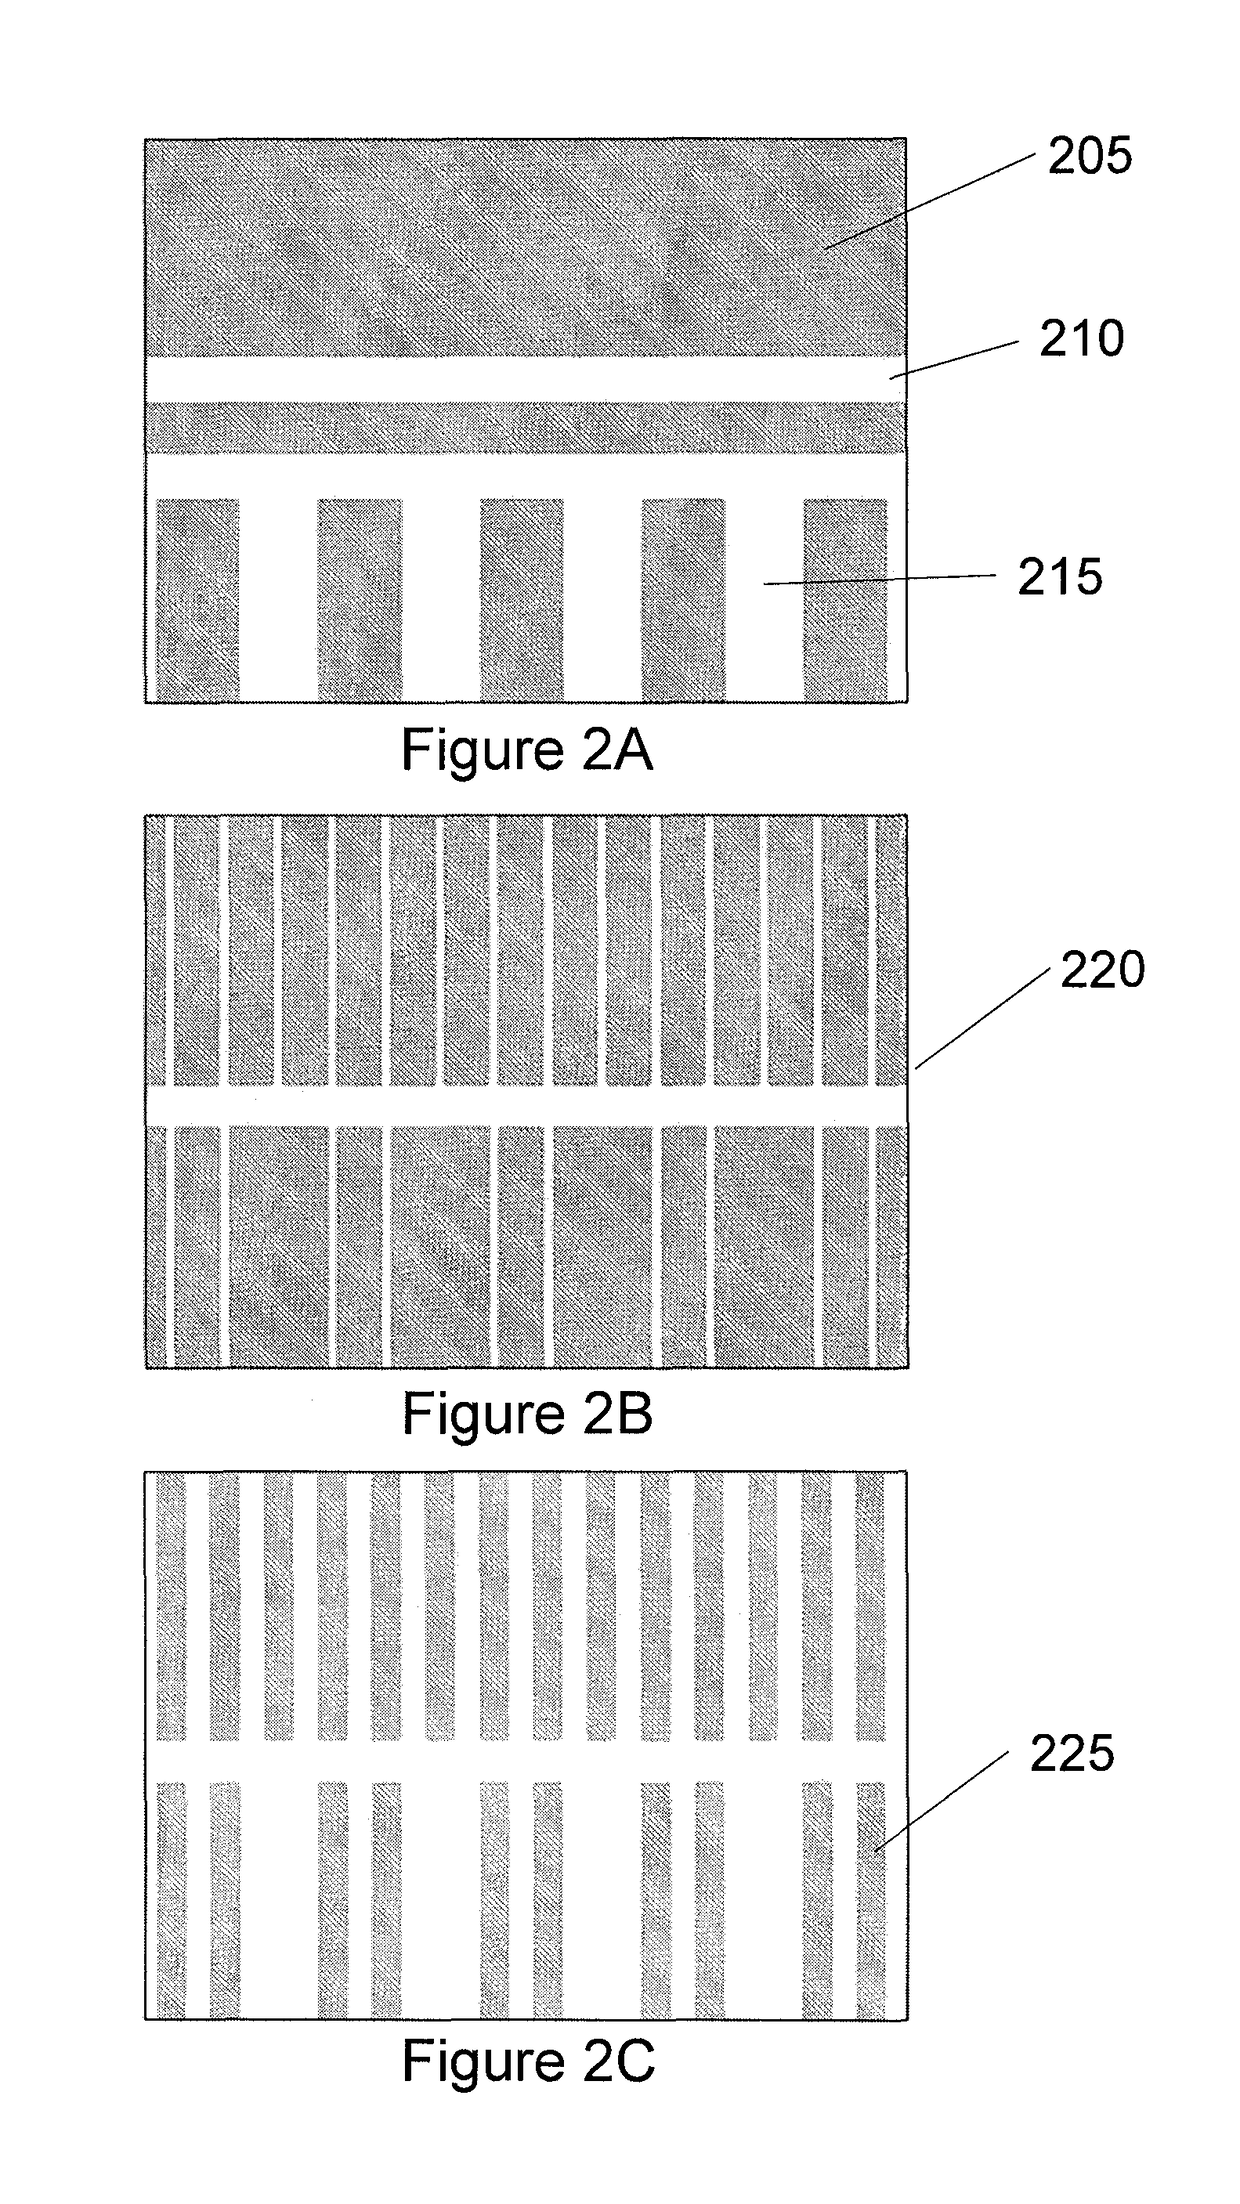 Semiconductor quantum dot device and method for forming a scalable linear array of quantum dots